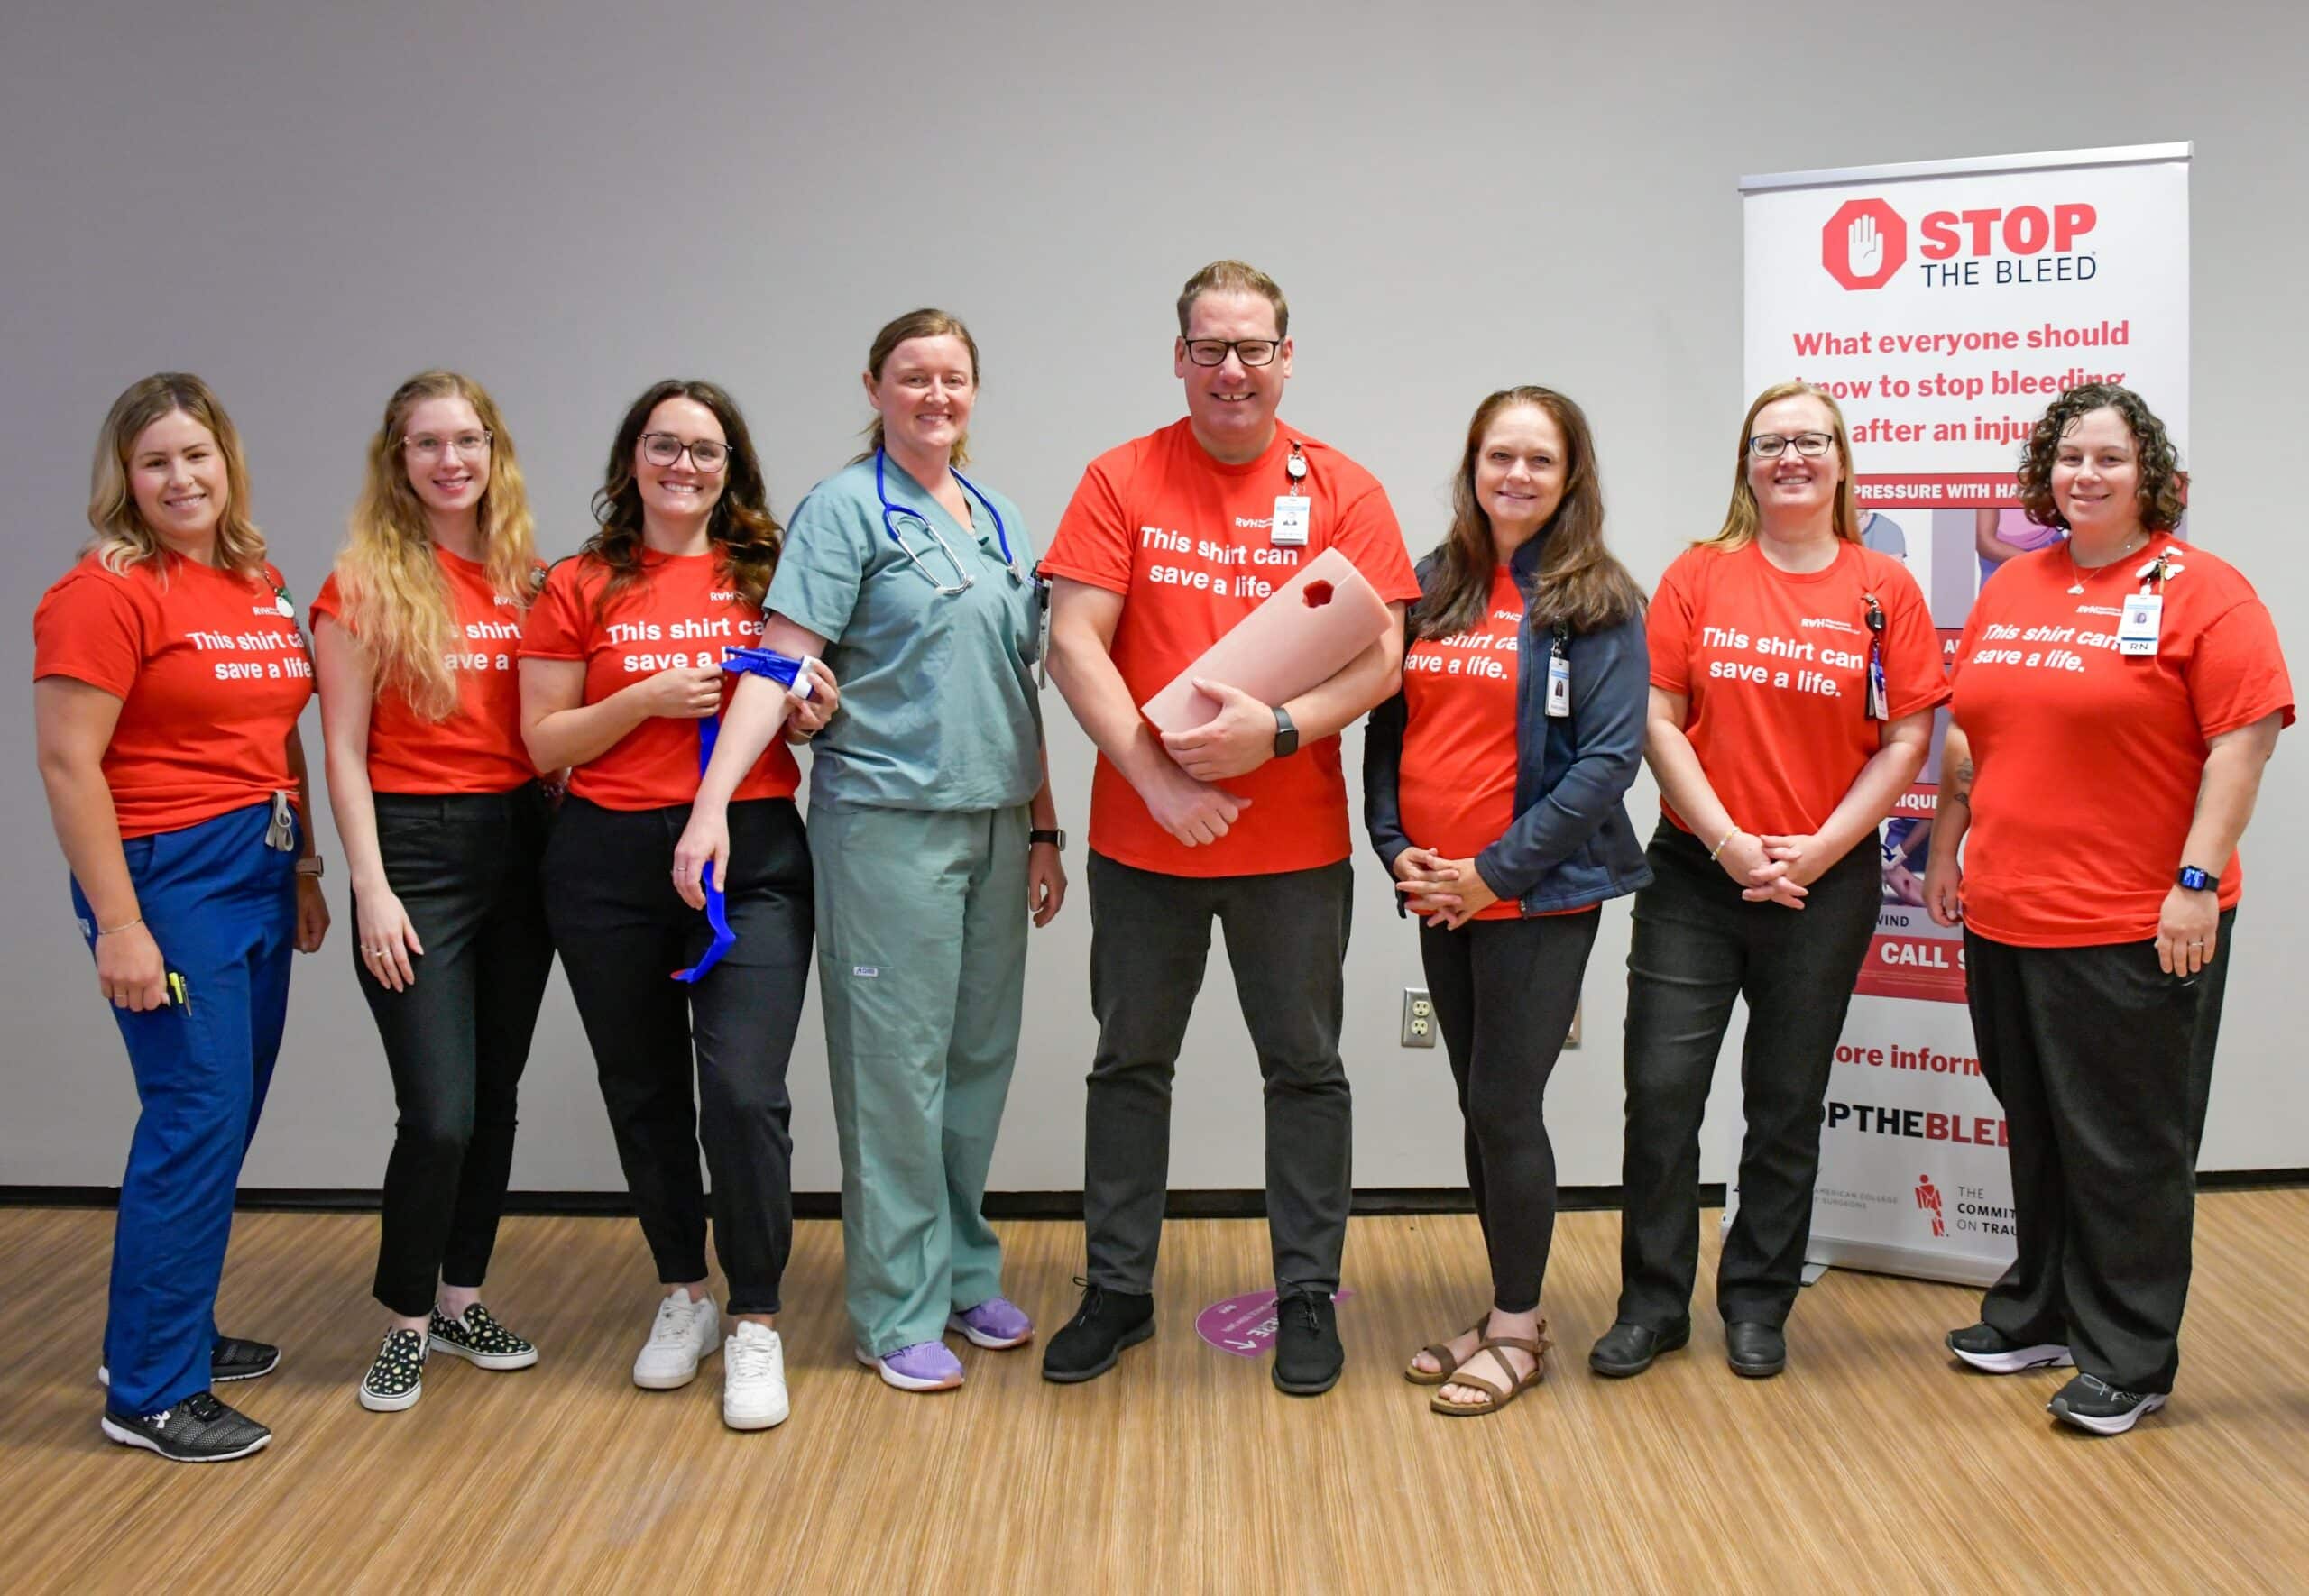 RVH and Canadian Blood Services Partner to Help Save Lives